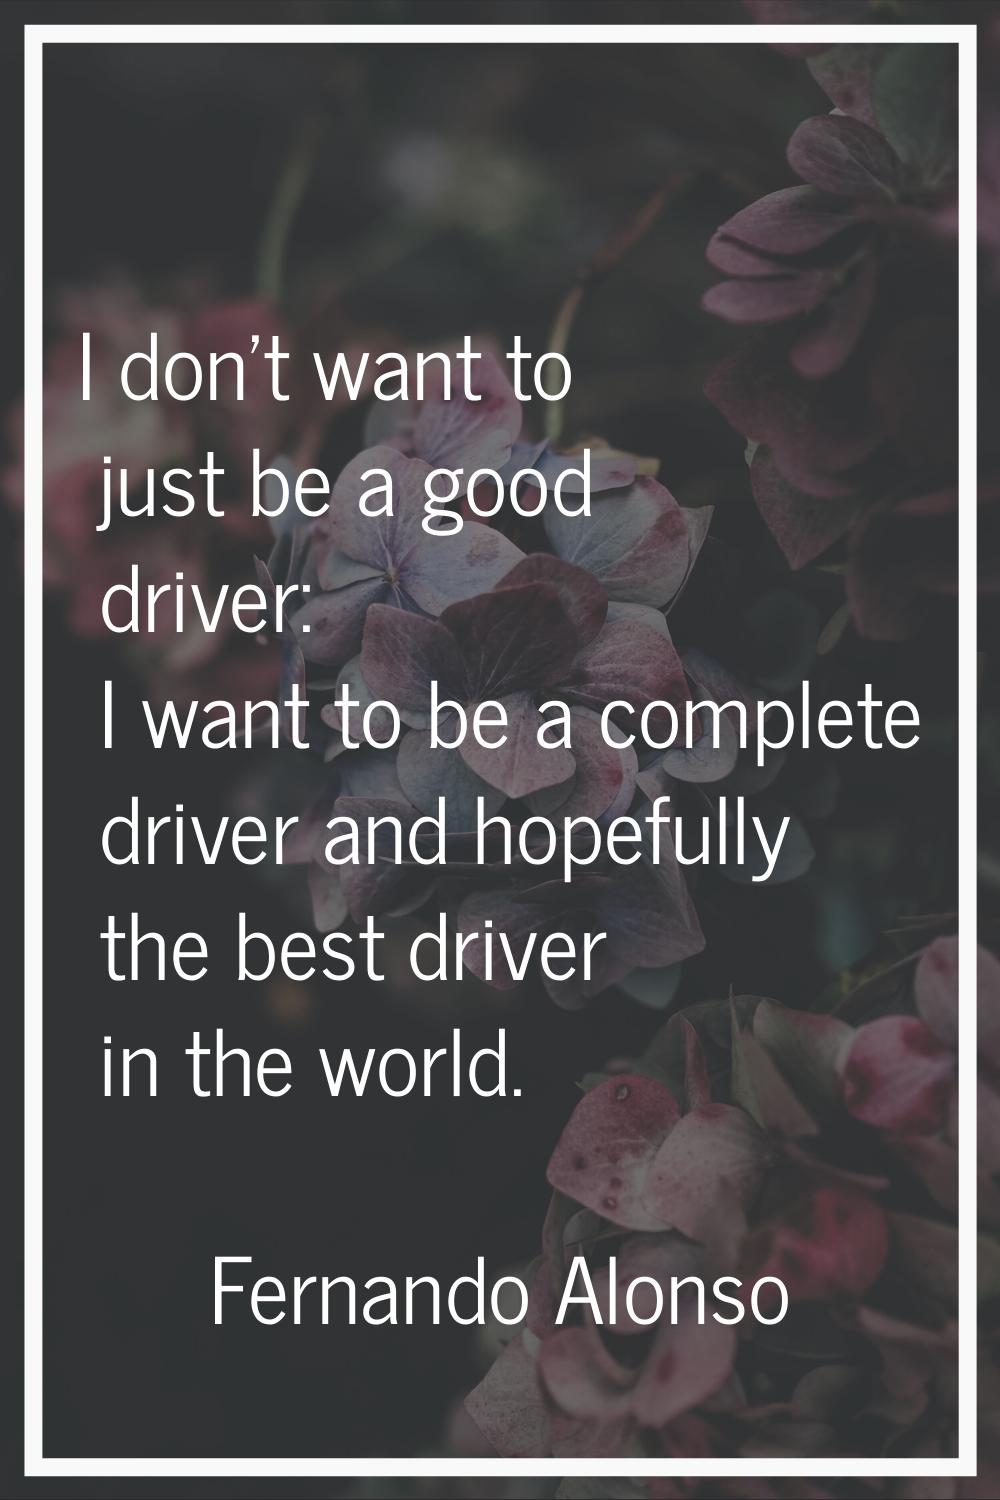 I don't want to just be a good driver: I want to be a complete driver and hopefully the best driver